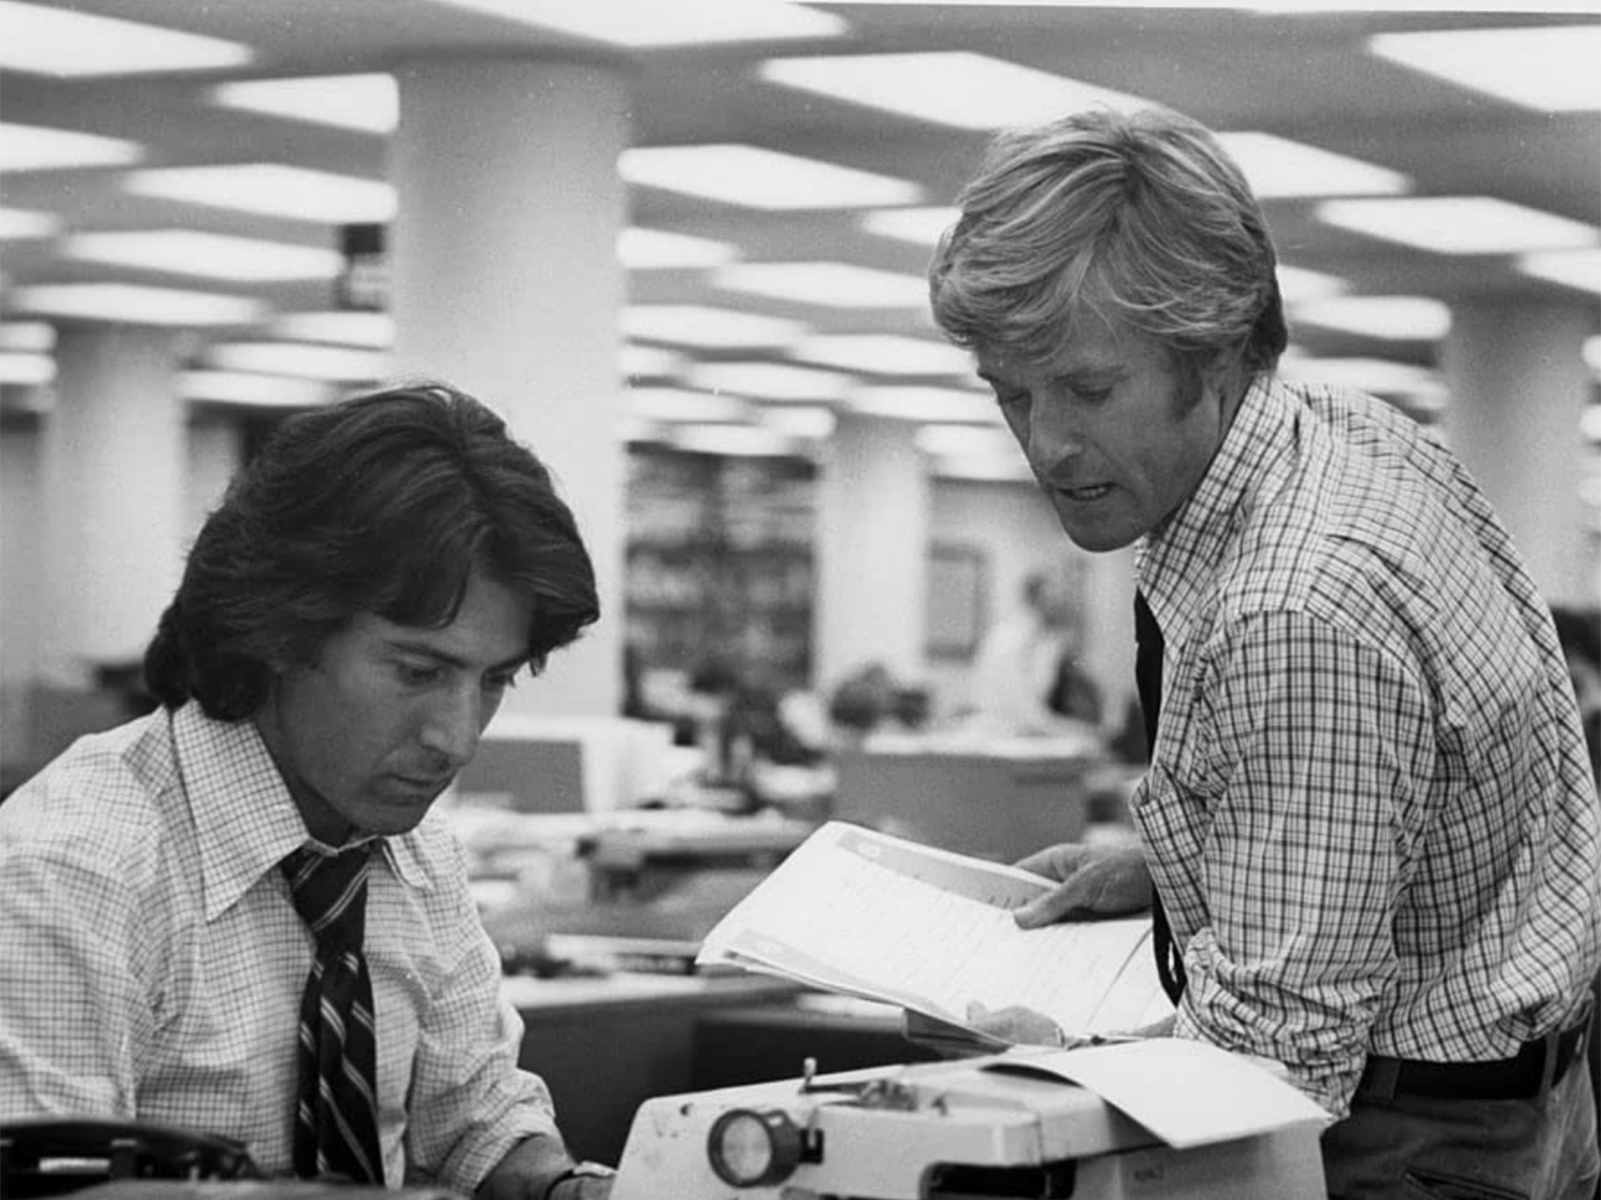 Dustin Hoffman and Robert Redford in “All the President